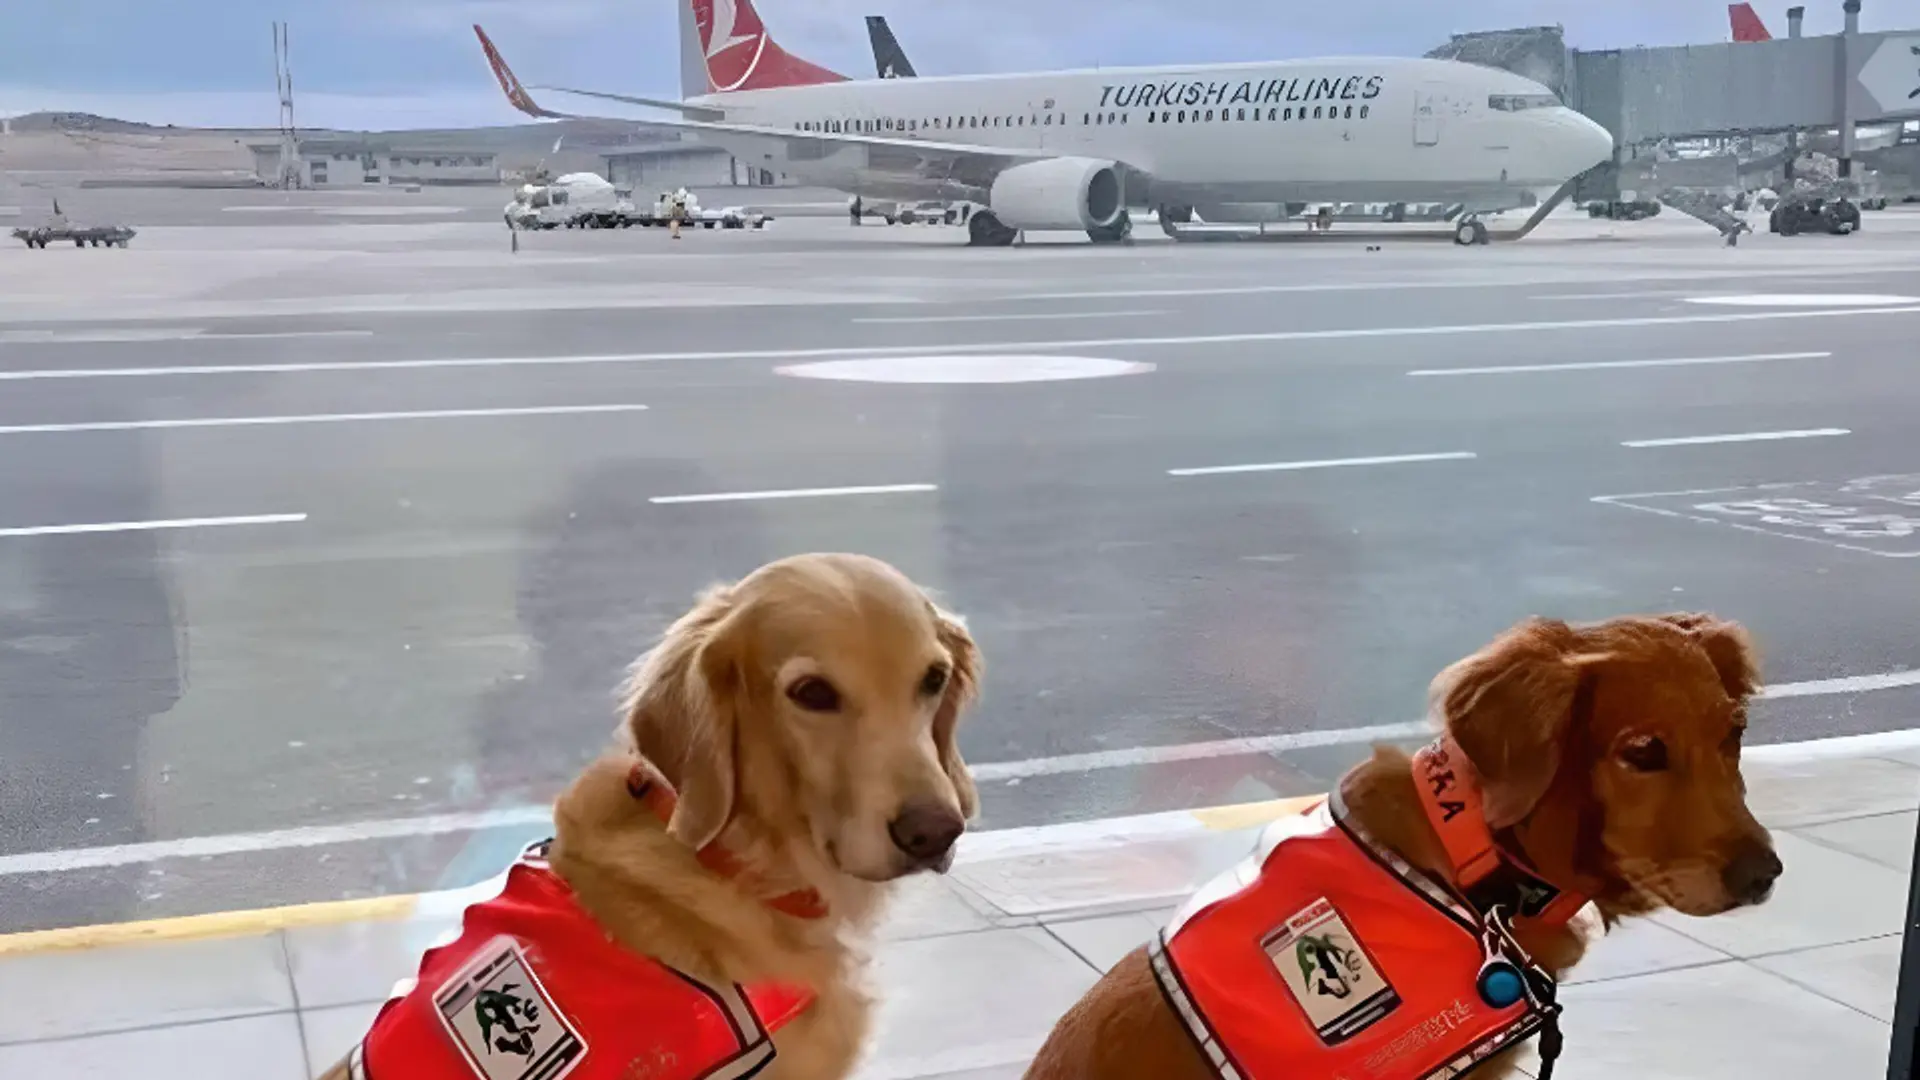 Two Golden Retriever's waiting to fly with Turkish Airlines